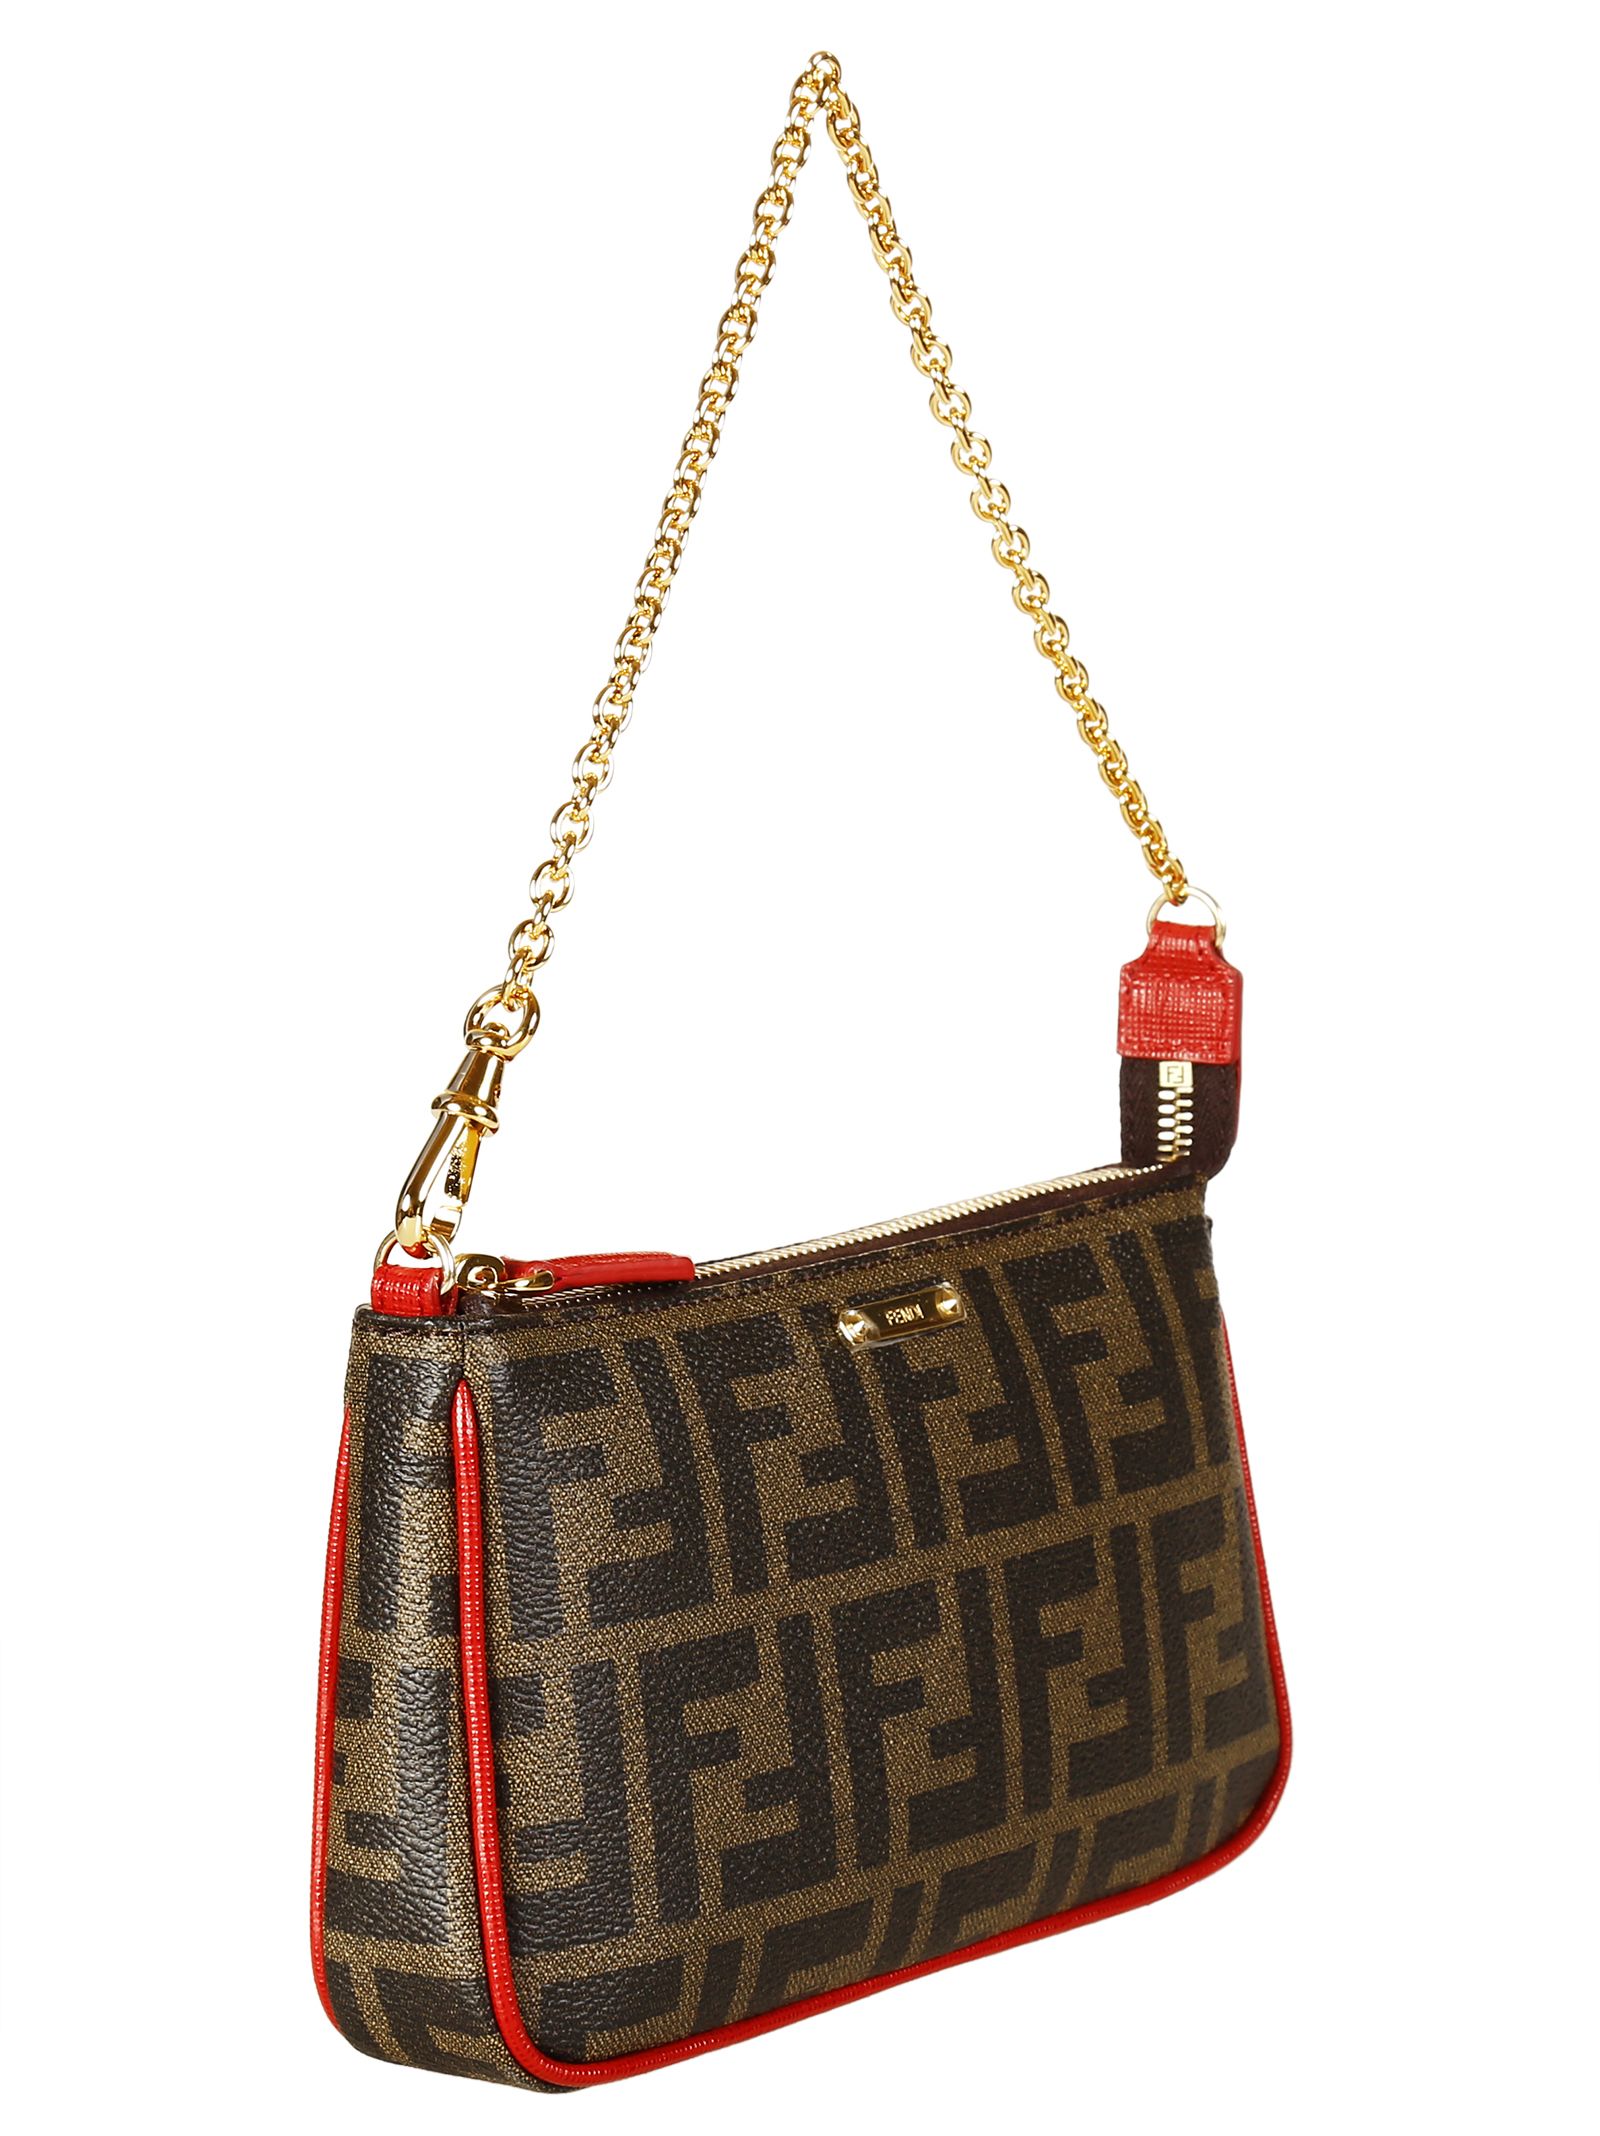 Awesome! Best price in the market for Fendi Logo Mini Bag